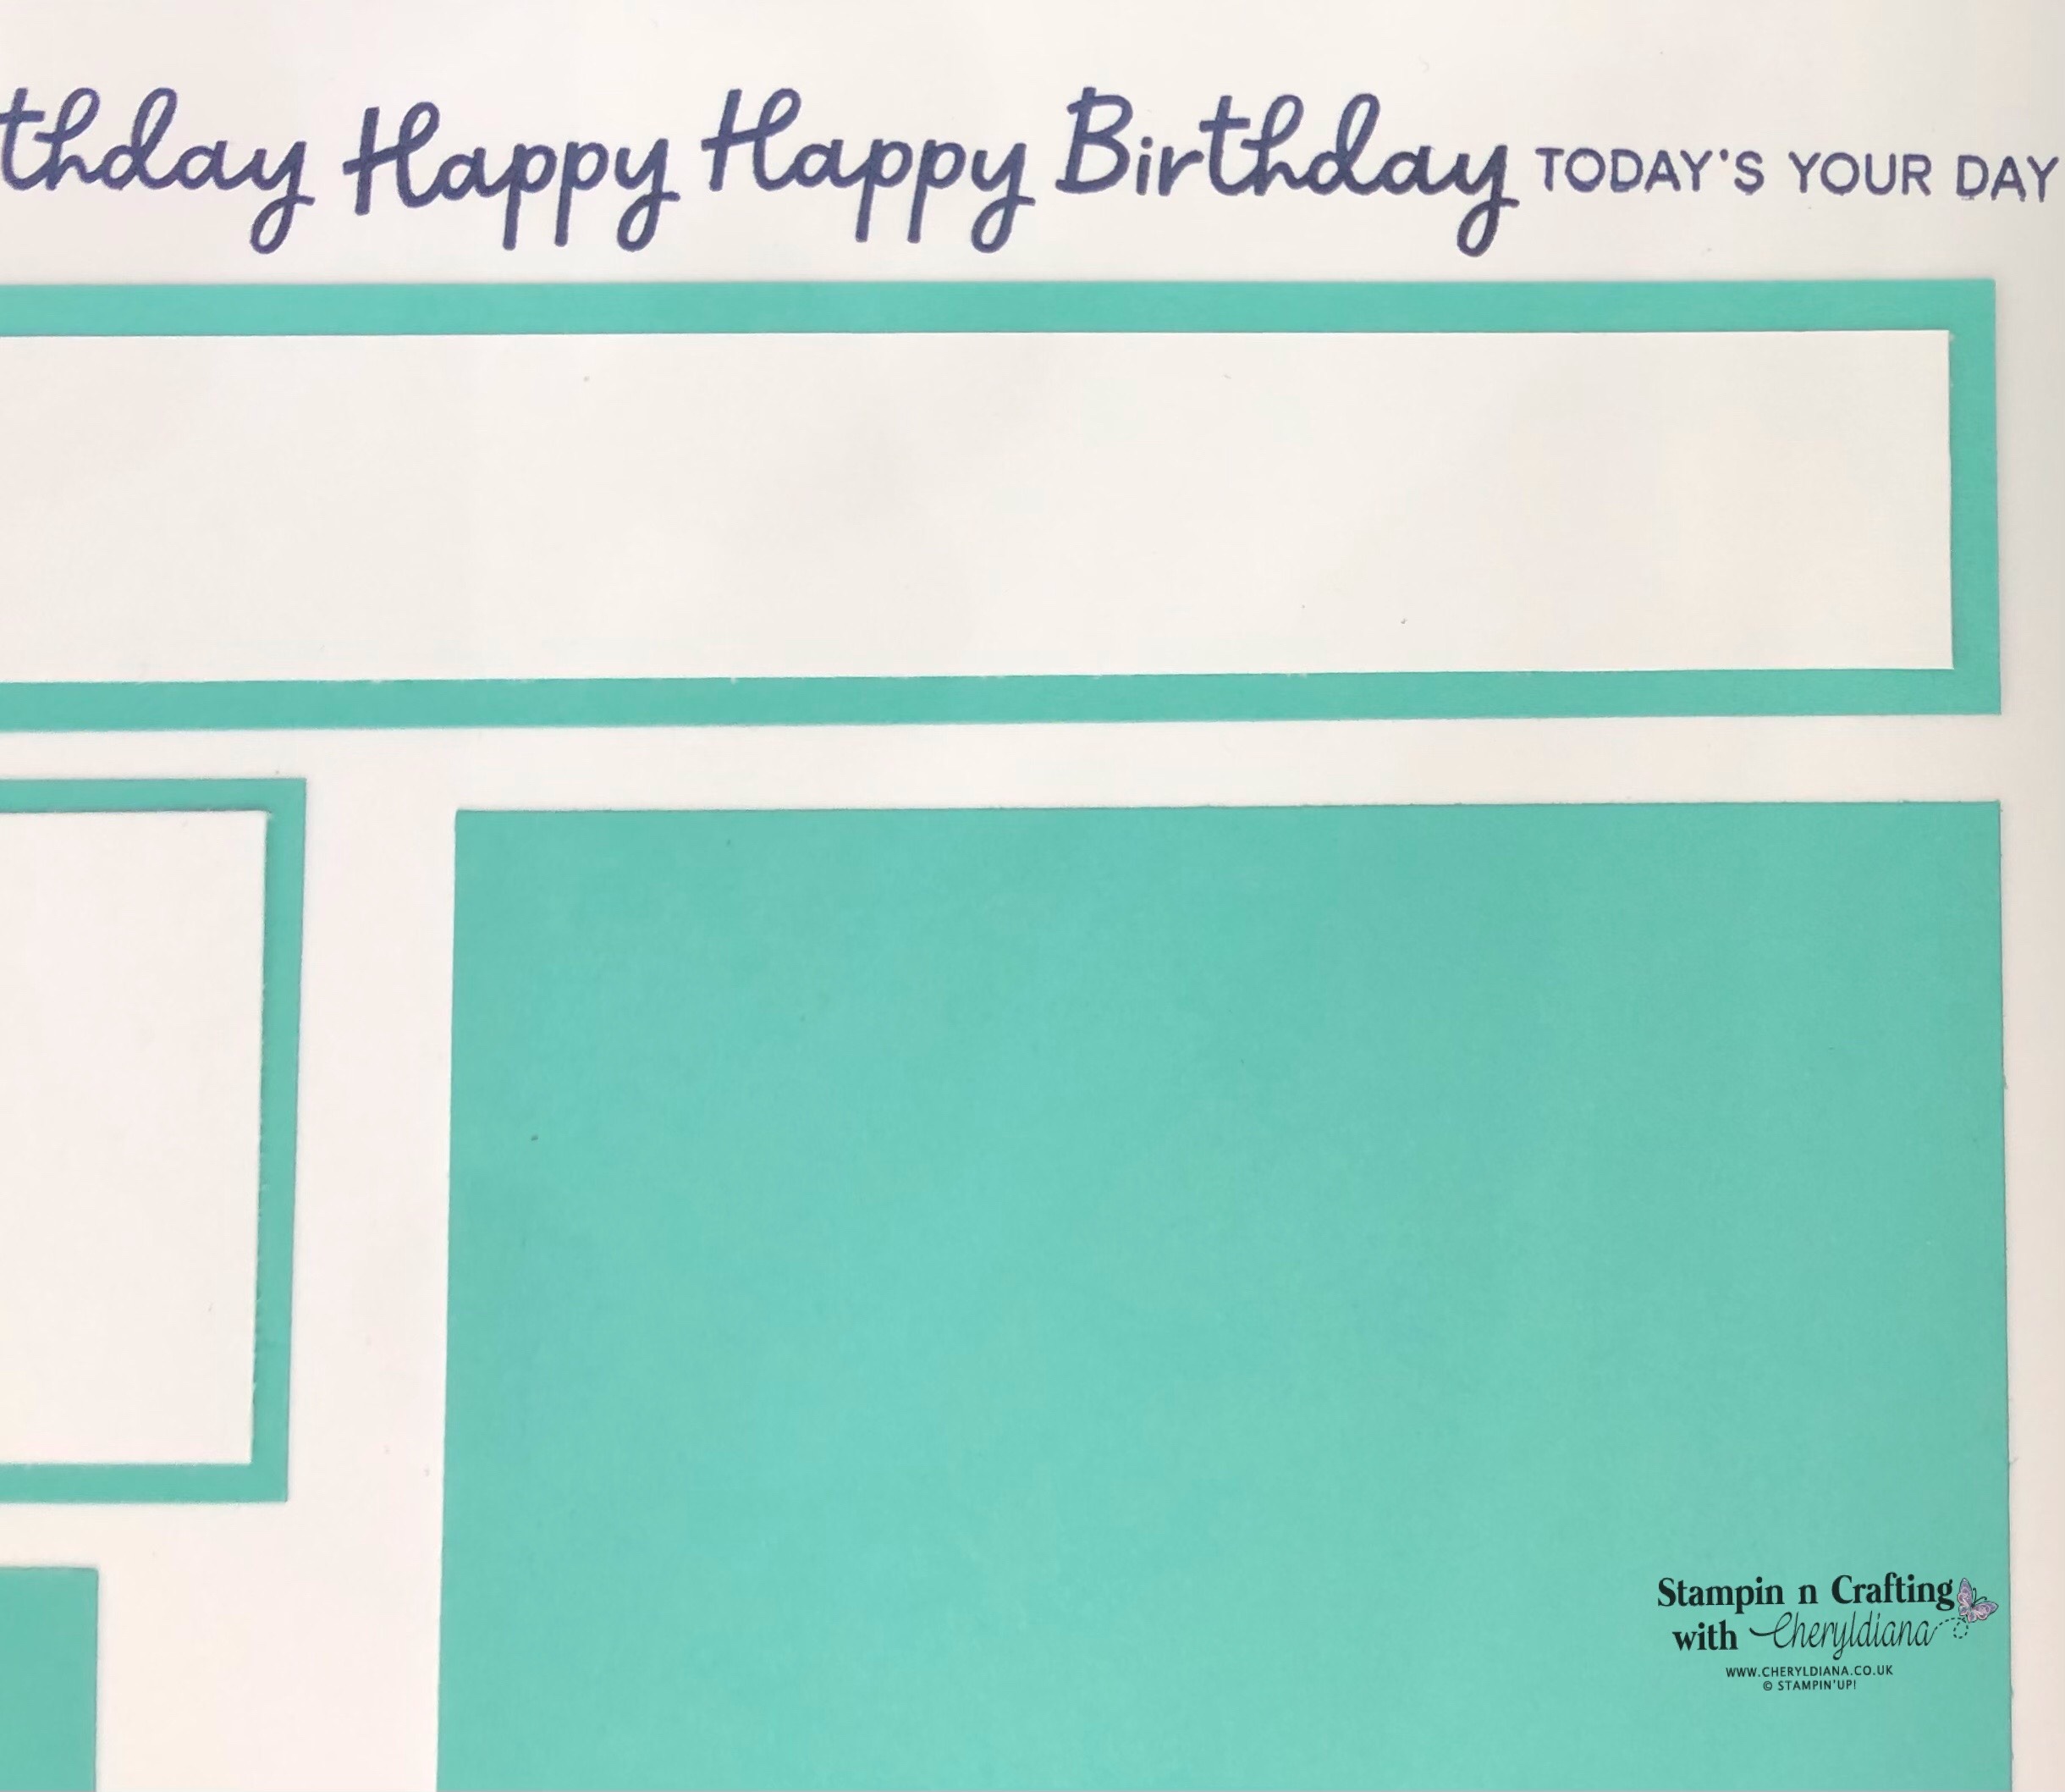 Photos of the top of the Happy Birthday Scrapbook Layout